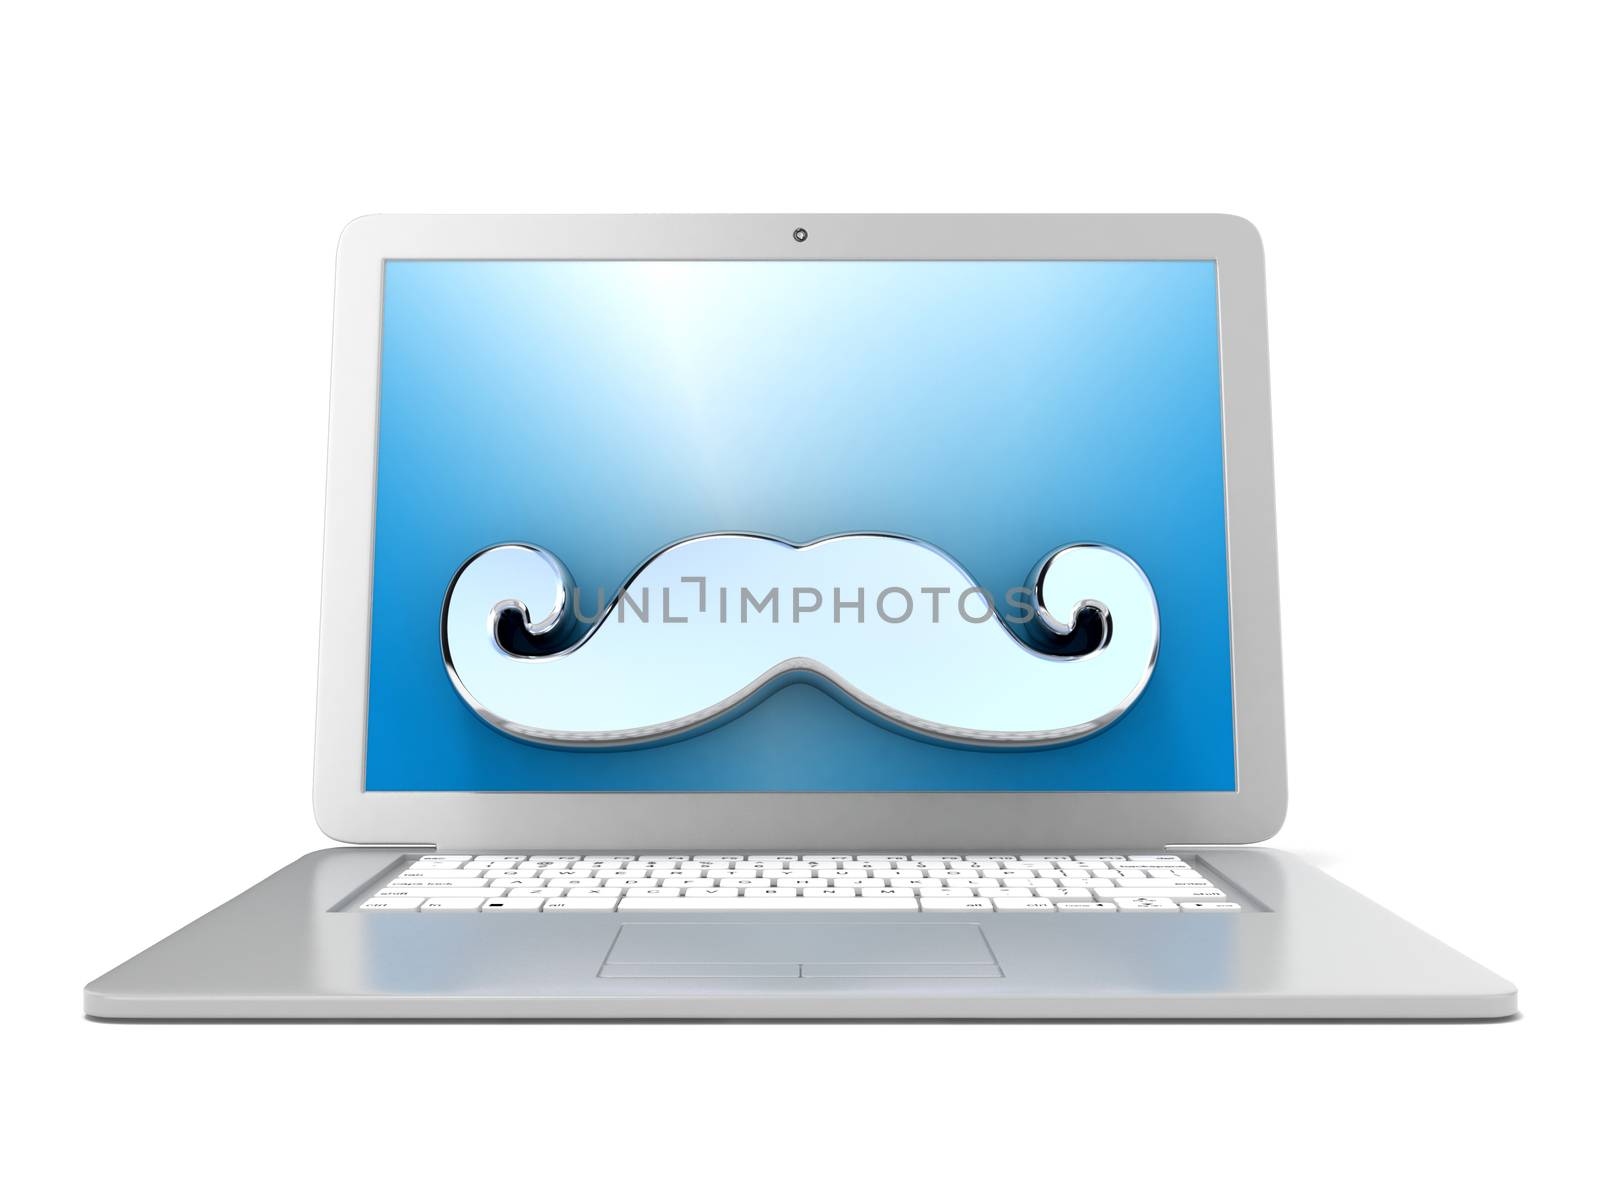 Mustache on laptop. Front view. 3D render illustration isolated on white background